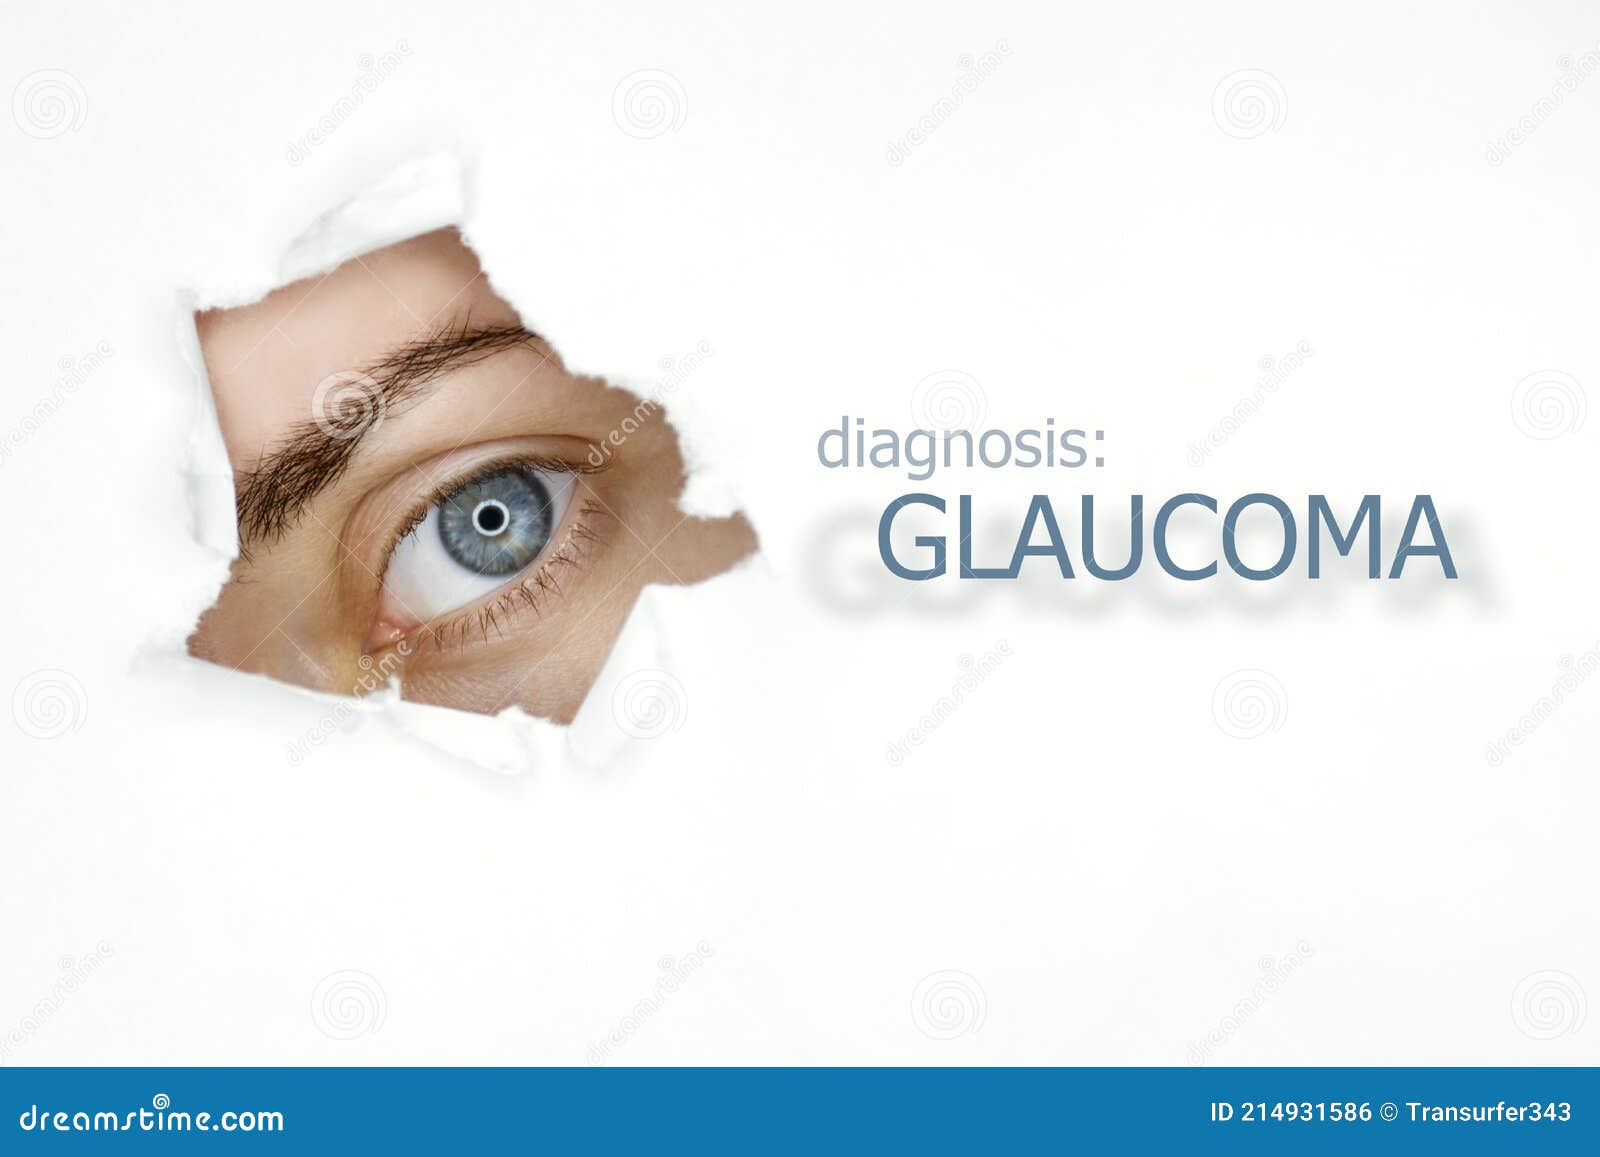 woman`s eye looking trough teared hole in paper, word glaucoma on right